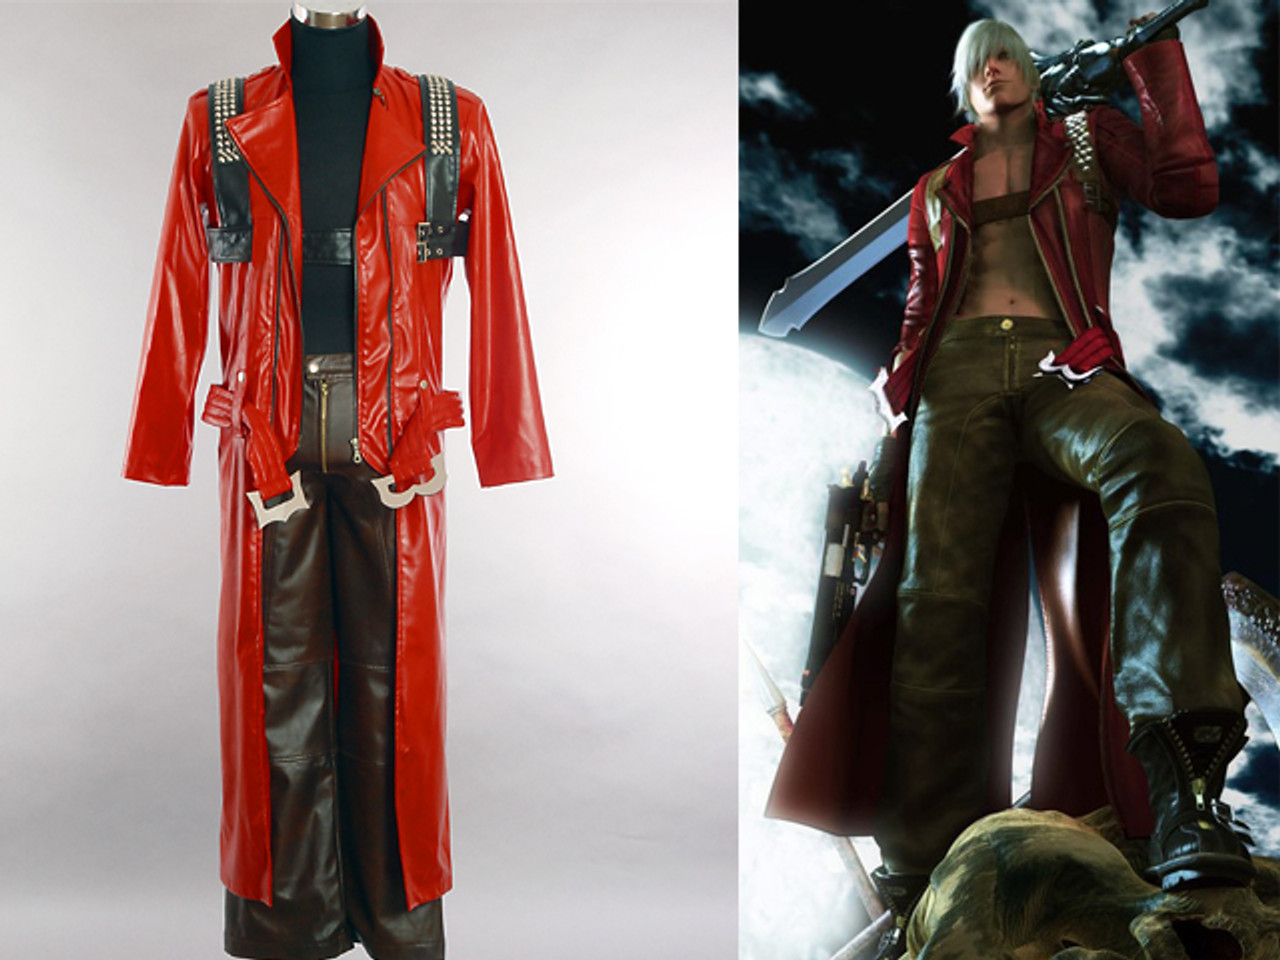 Devil May Cry Cosplay, Dante PU Leather Costume Set